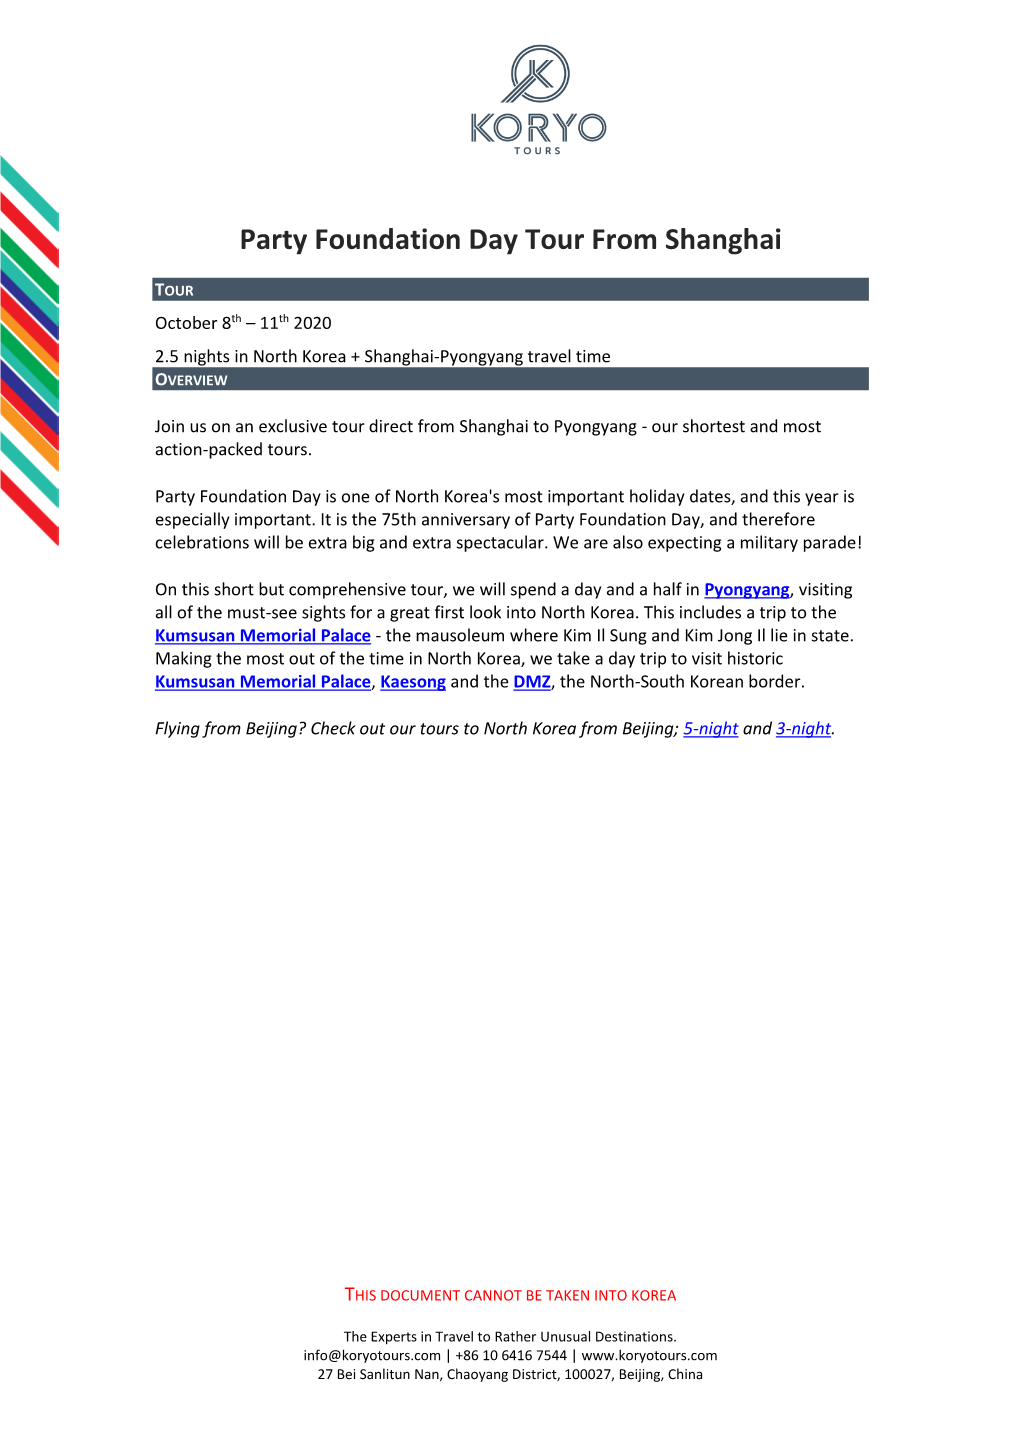 Party Foundation Day Tour from Shanghai